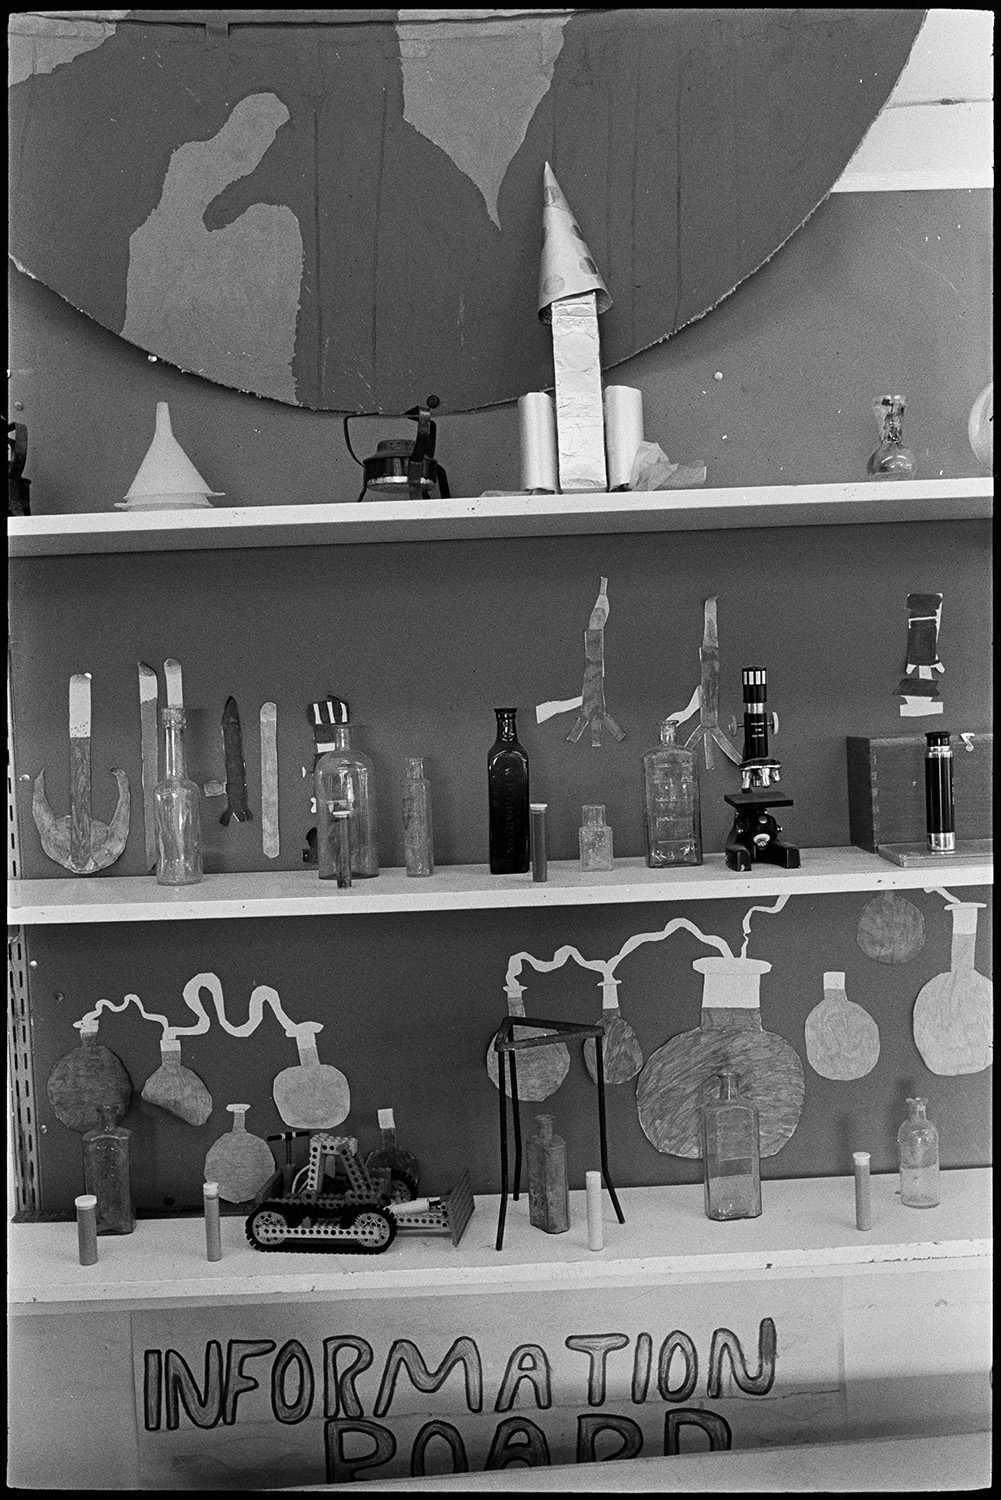 Schoolchildren working on space project pretending to be astronauts in spacecraft. 
[A display of children's school work in a classroom in Bideford Primary School about a space project they have been working on. The display includes bottles, a Bunsen burner, microscope, pictures of test tubes and a model digger.]